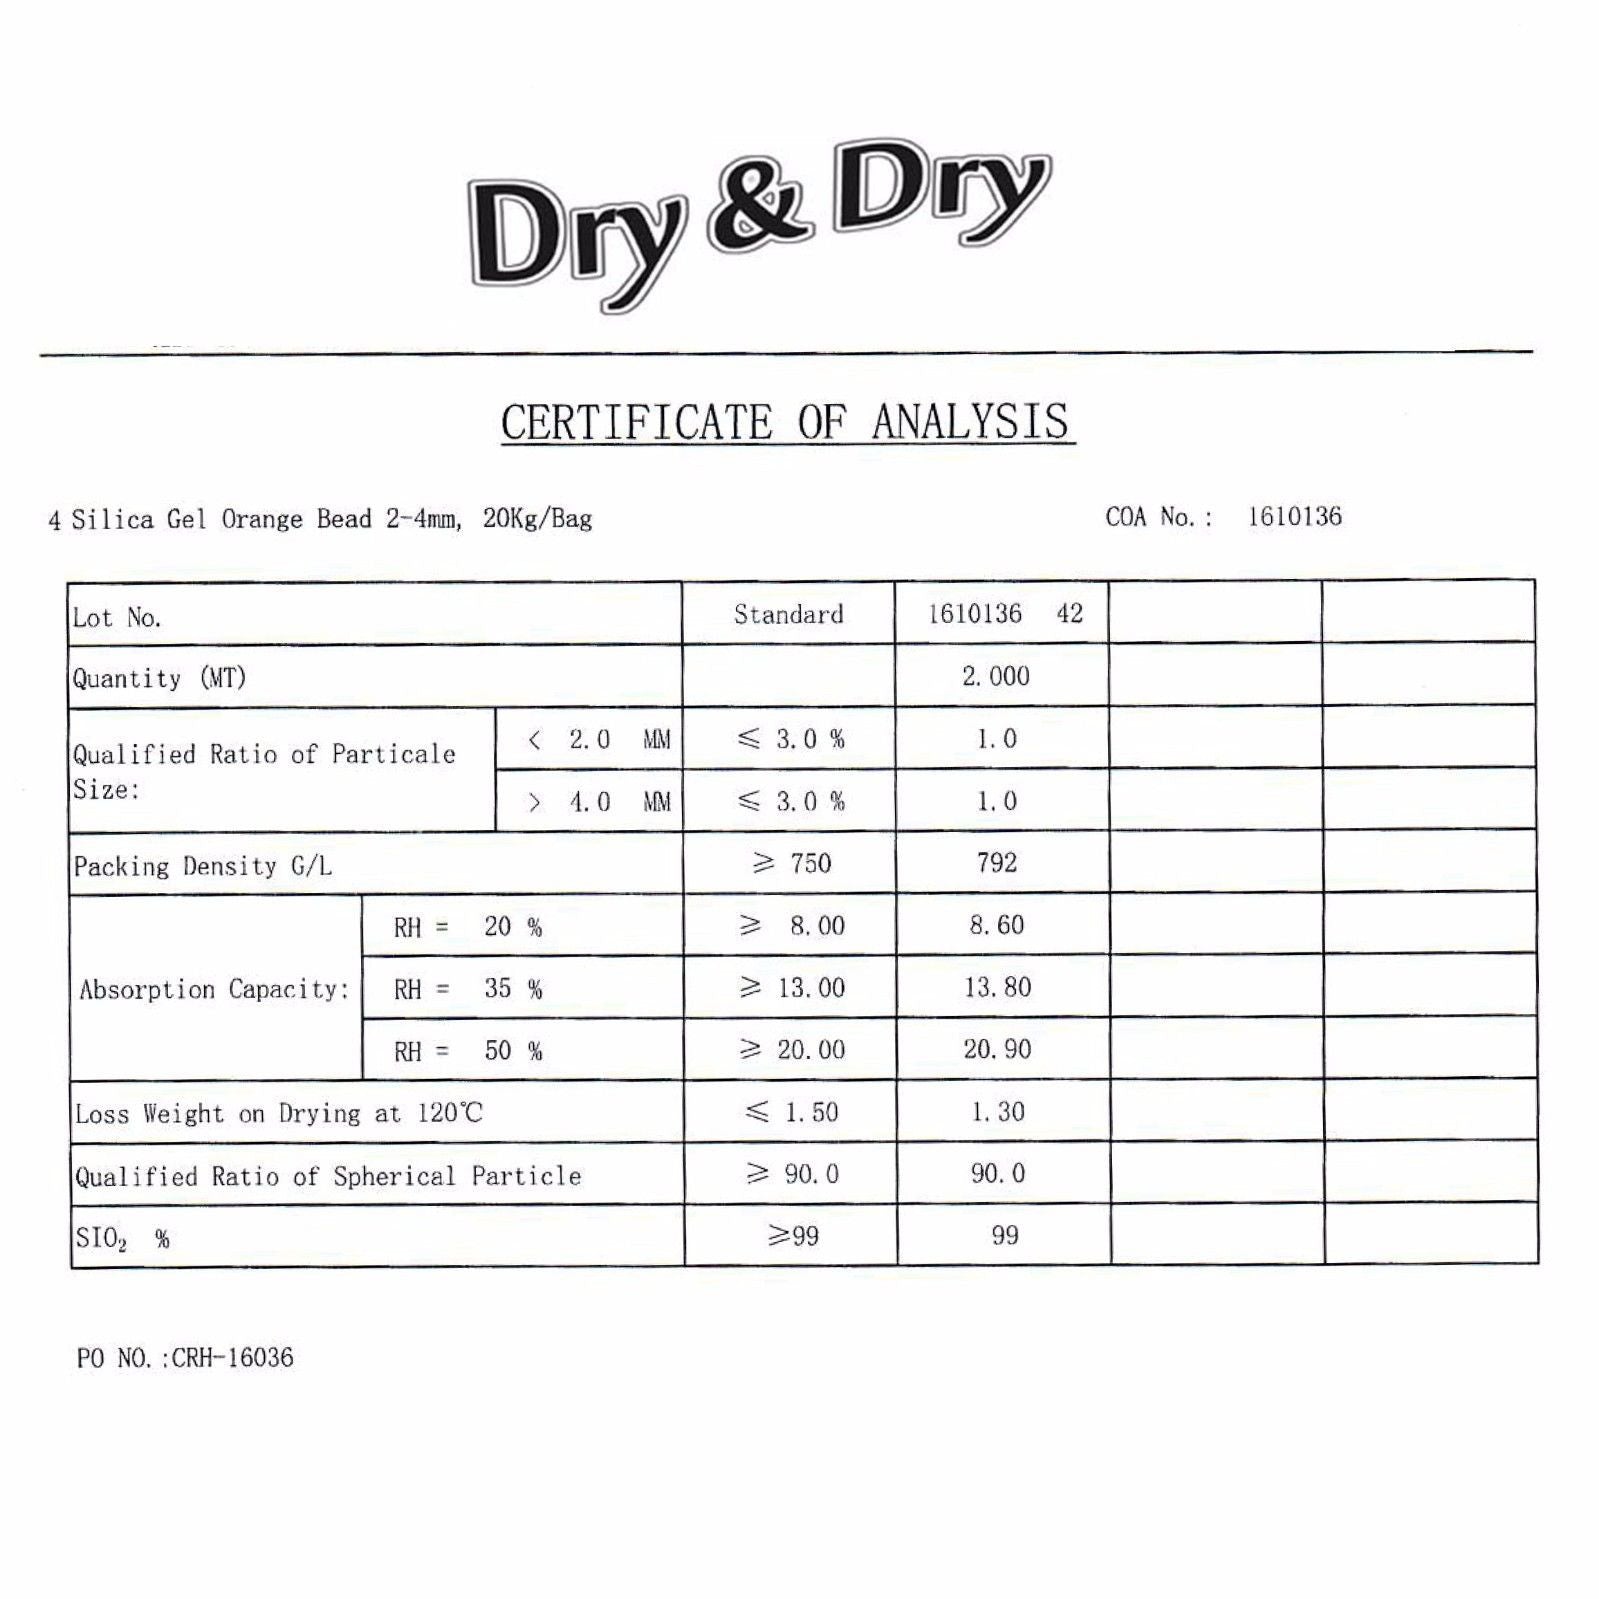 8 Gallon(56-60 LBS) "Dry & Dry" Premium Orange & White Mixed Indicating Silica Gel Desiccant Beads(Industry Standard 3-5 mm) - Rechargeable